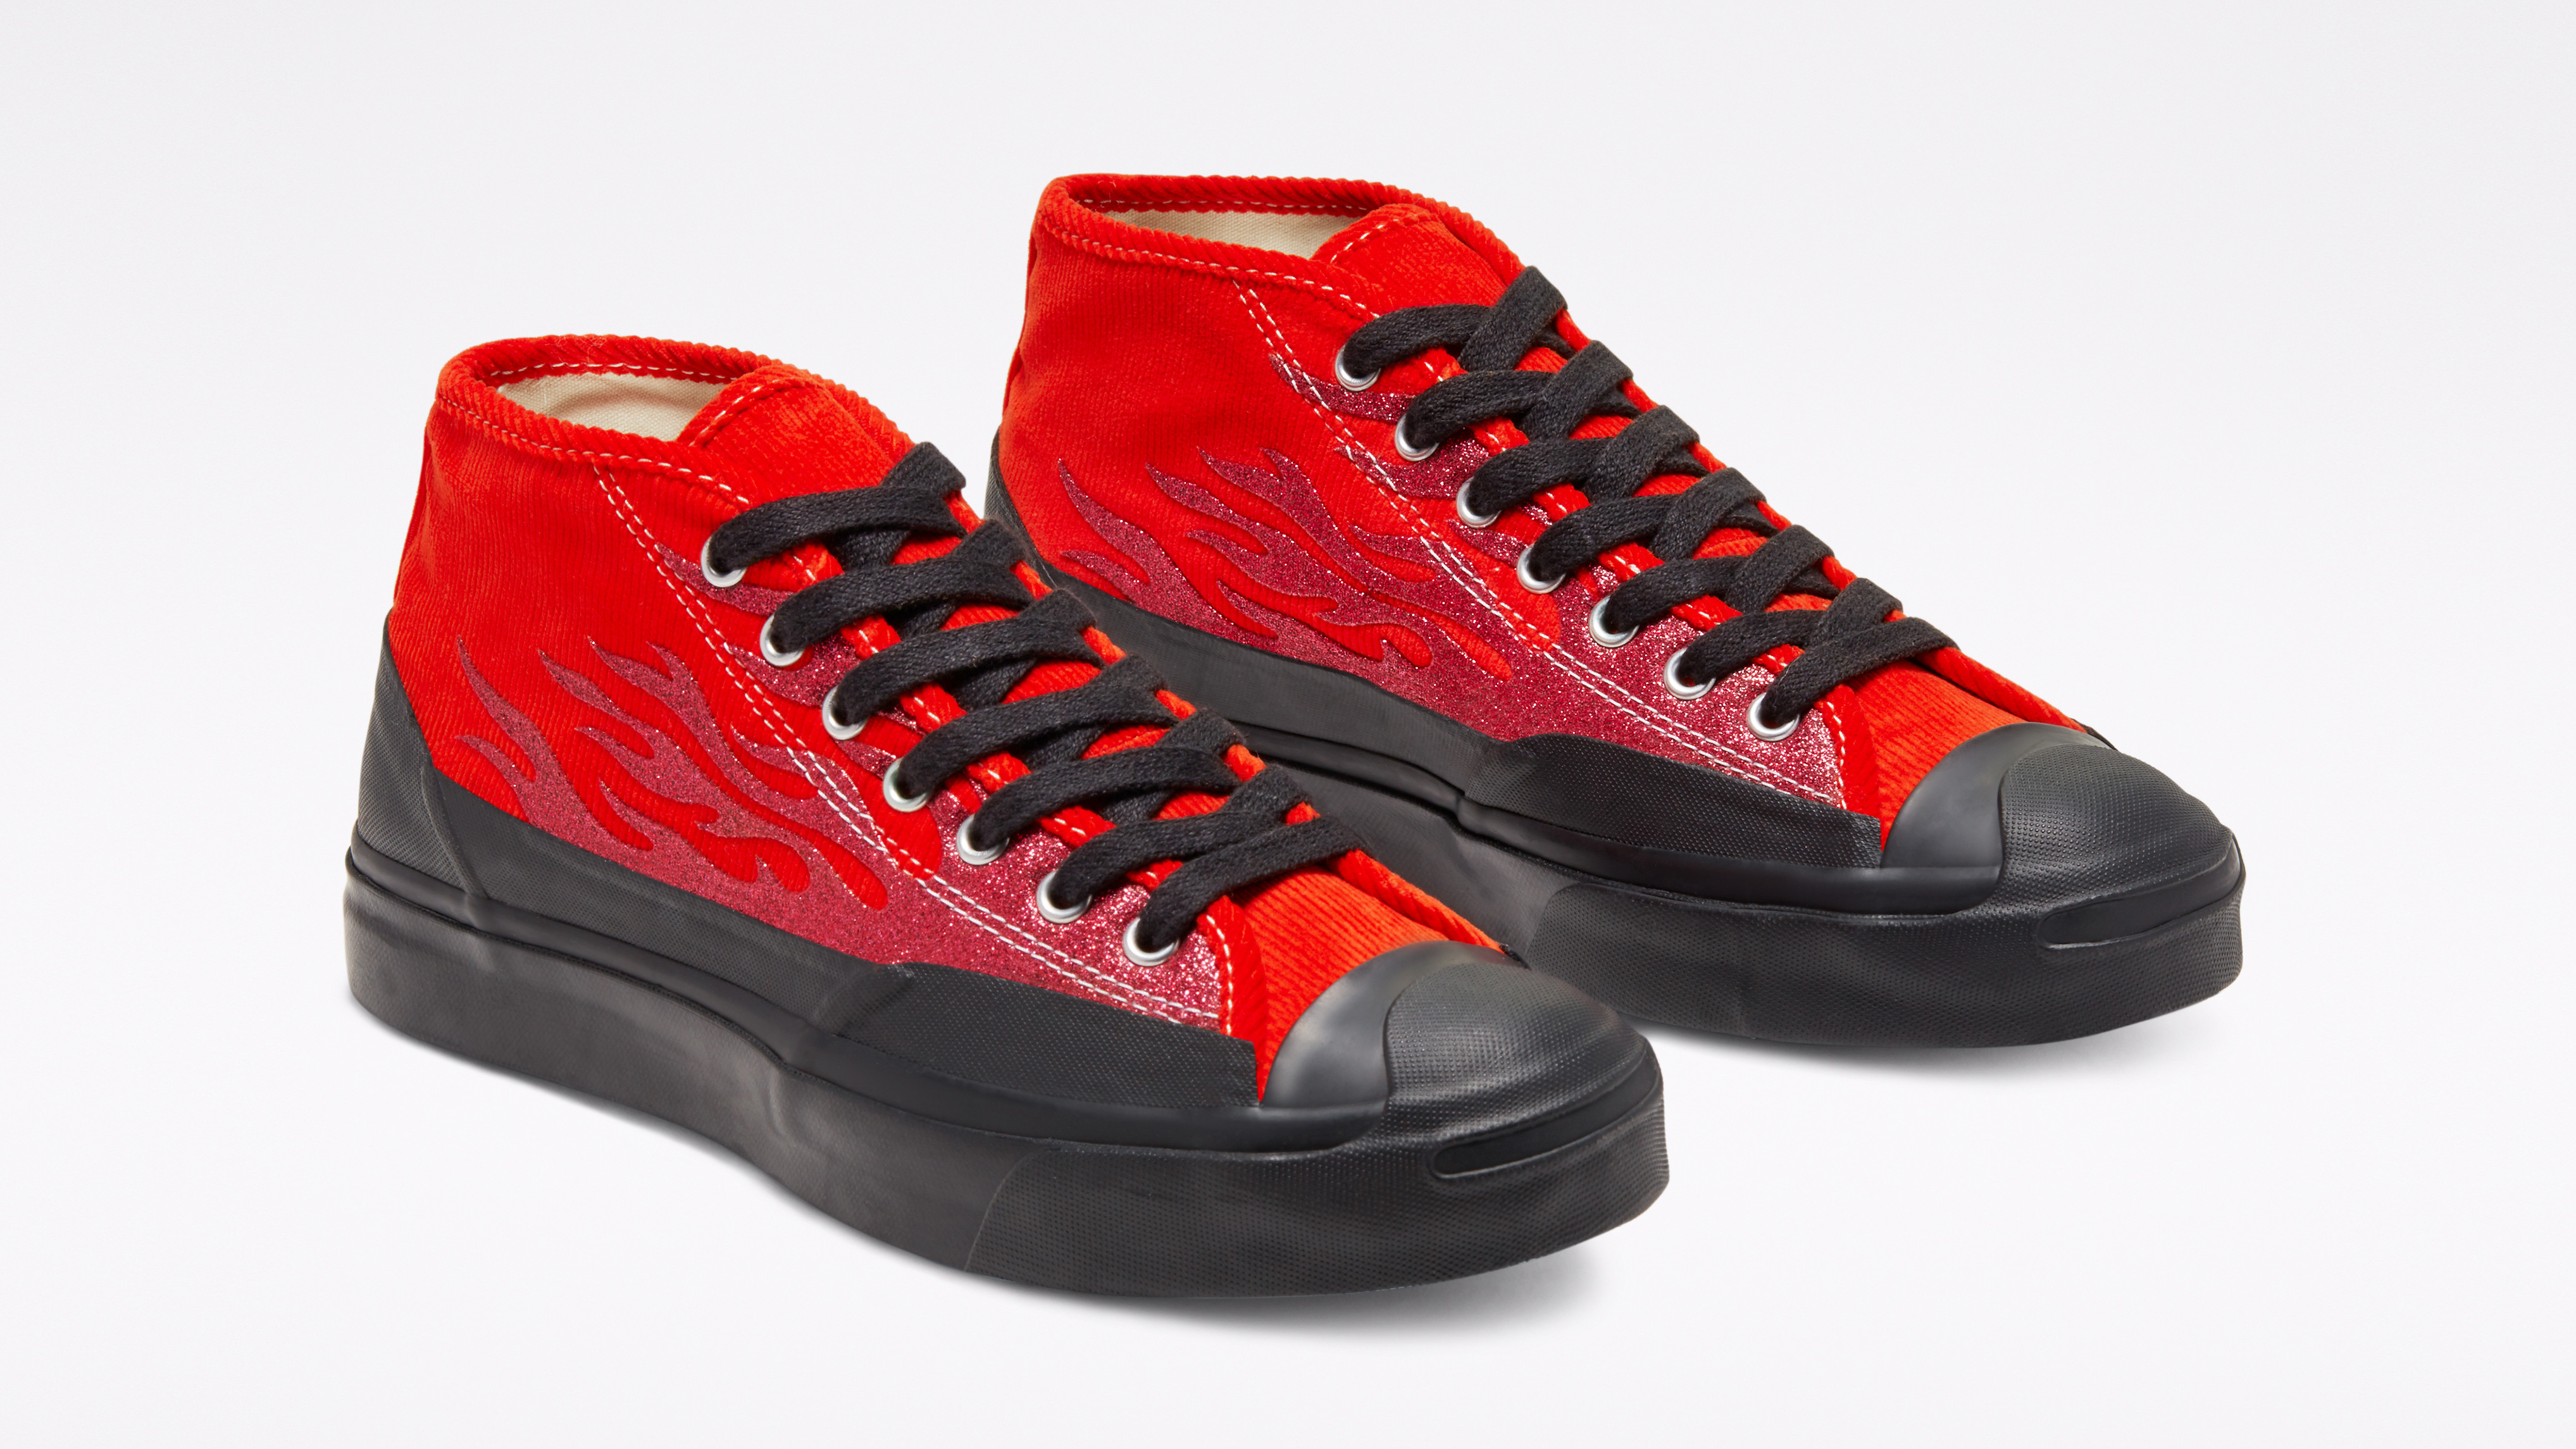 ASAP Nast Converse Jack Purcell Mid Date | Sole